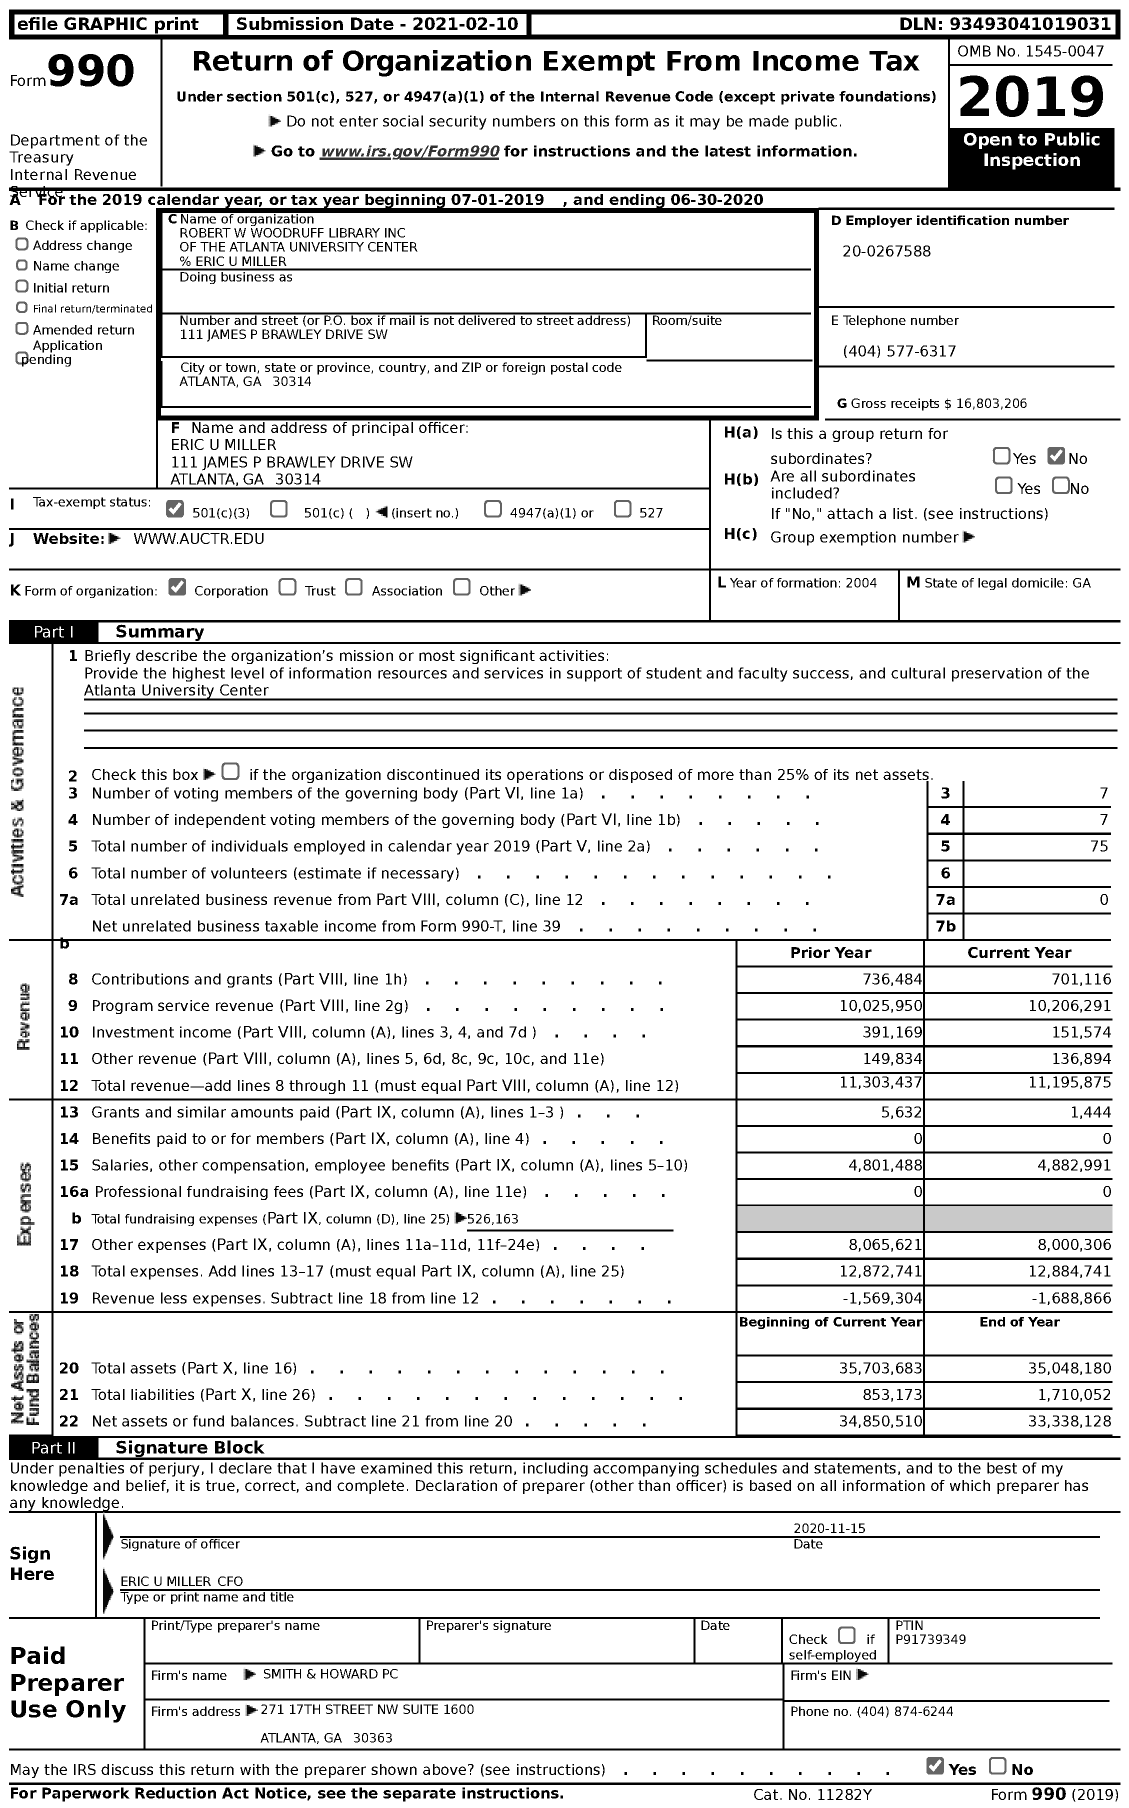 Image of first page of 2019 Form 990 for the Robert W Woodruff Library of the Atlanta University Center (AUC)